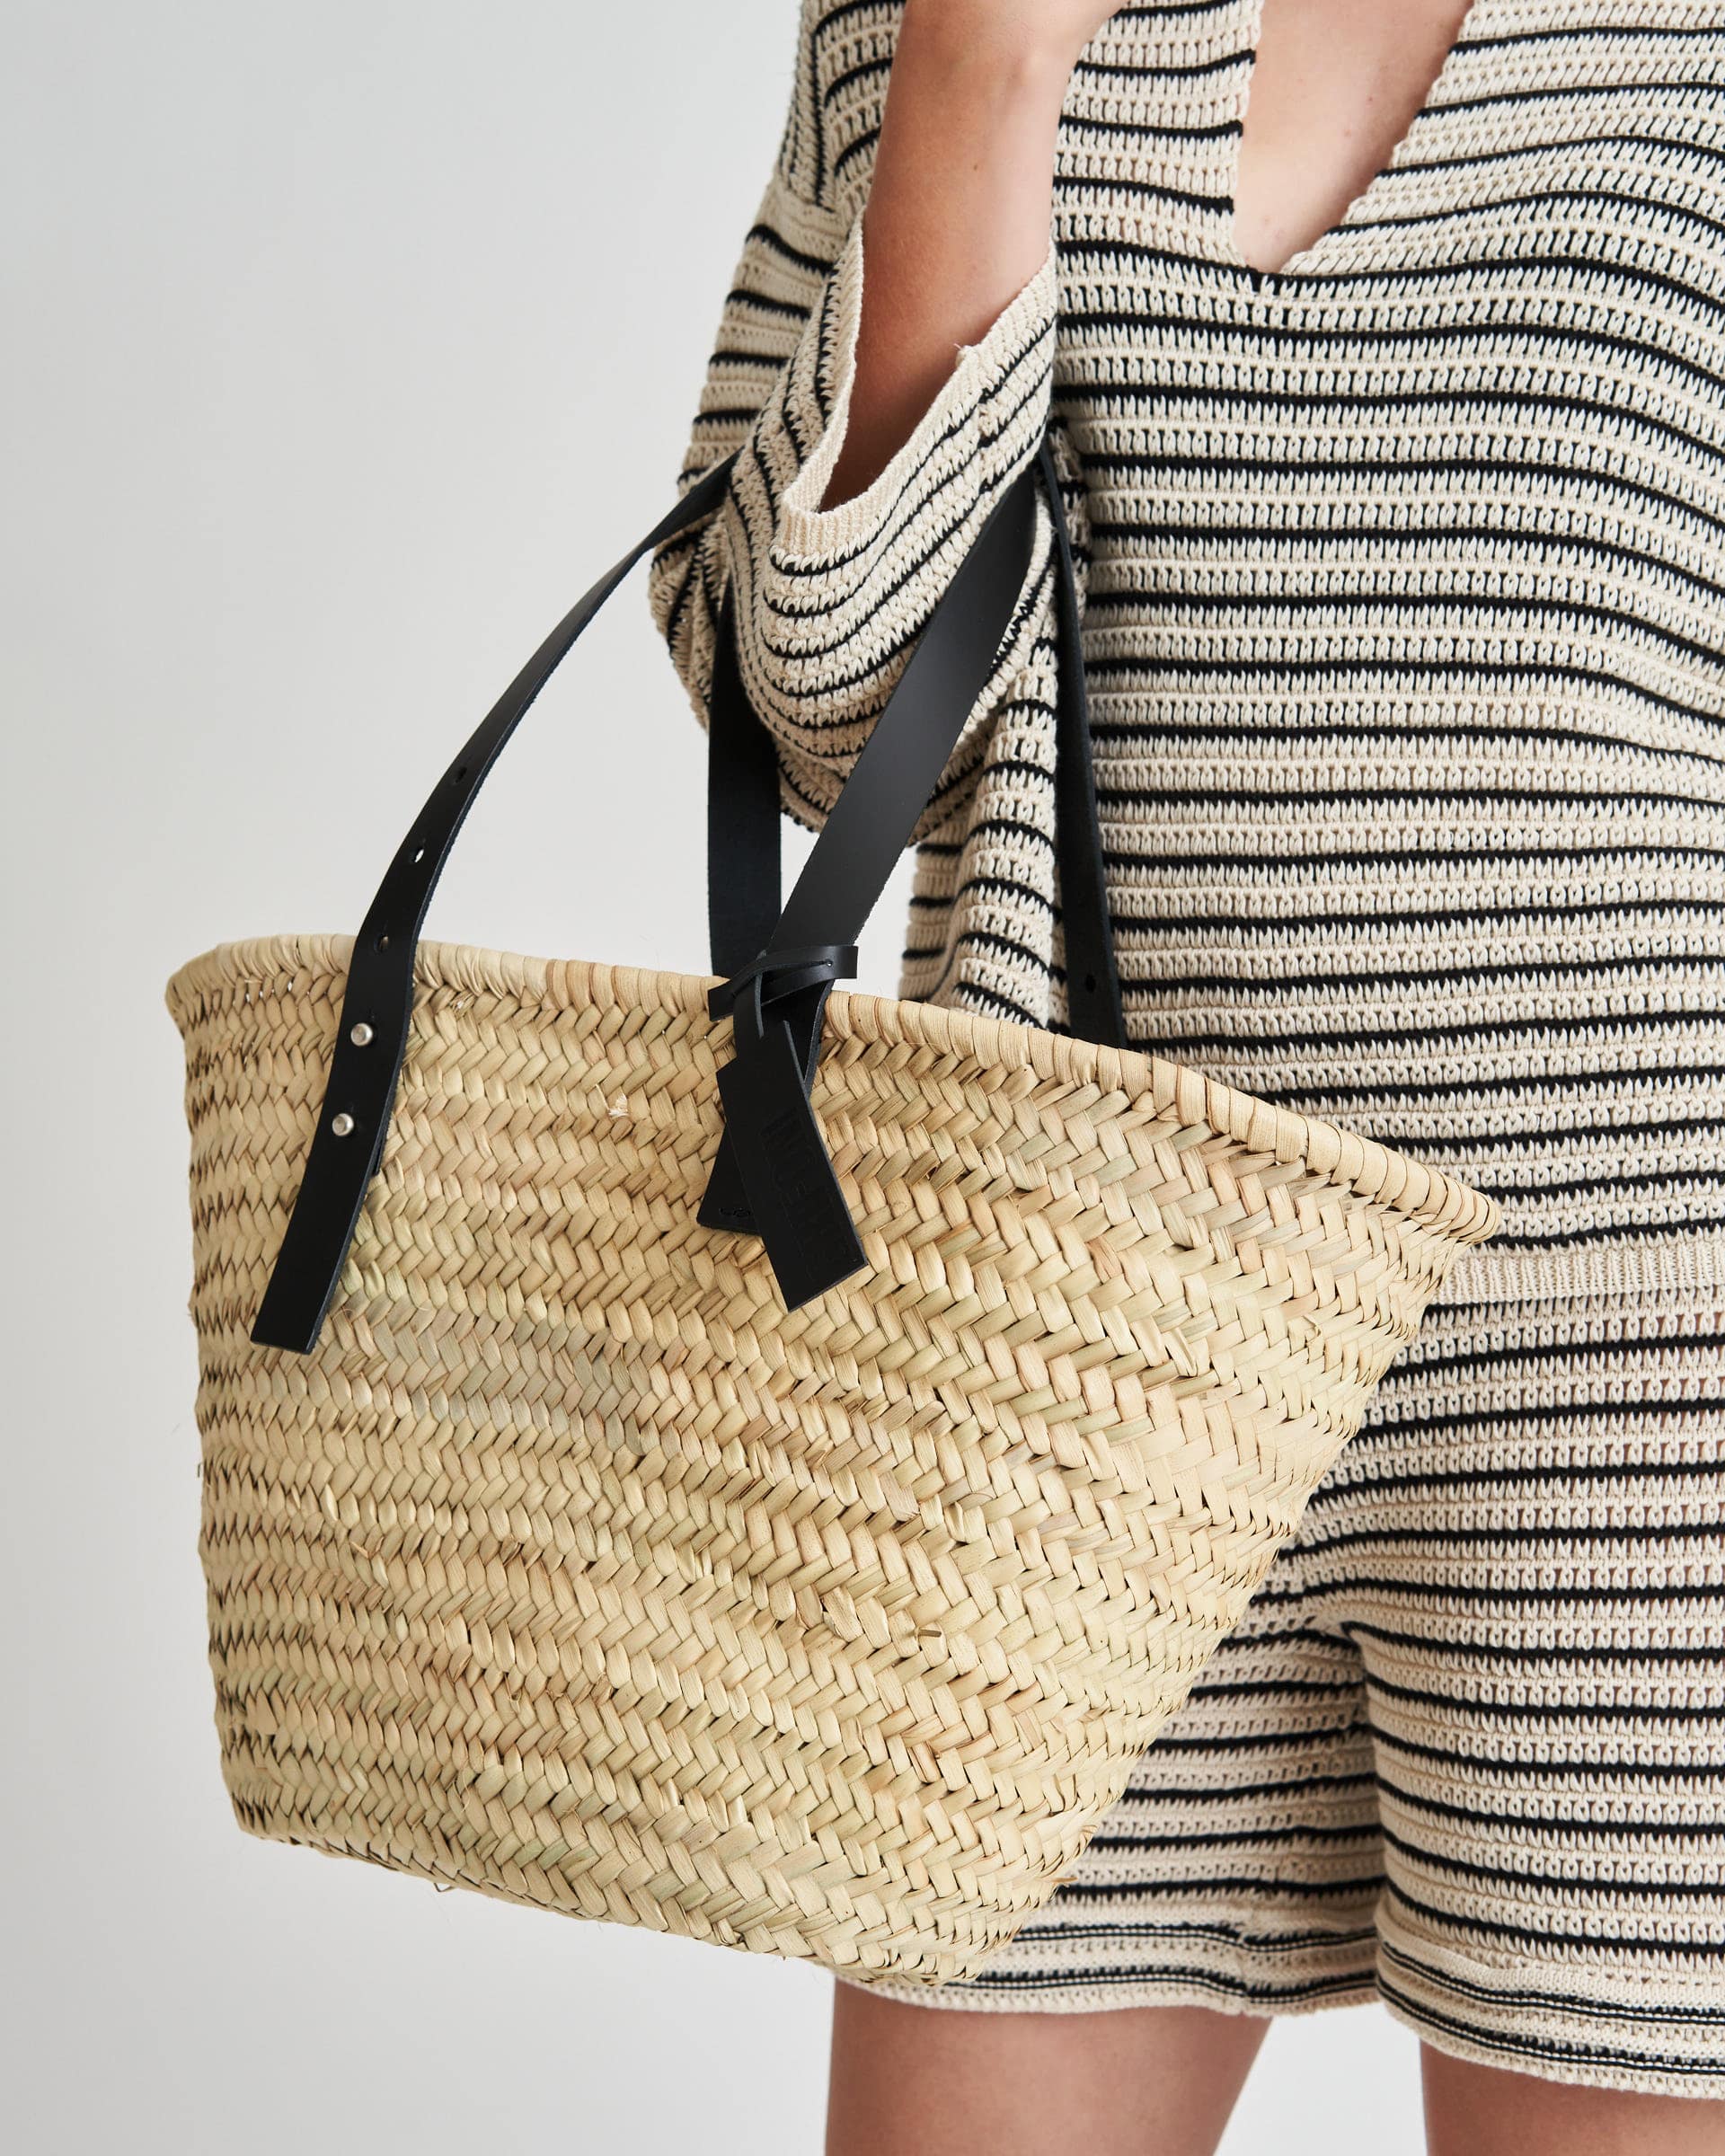 The Market Store | Straw Bag